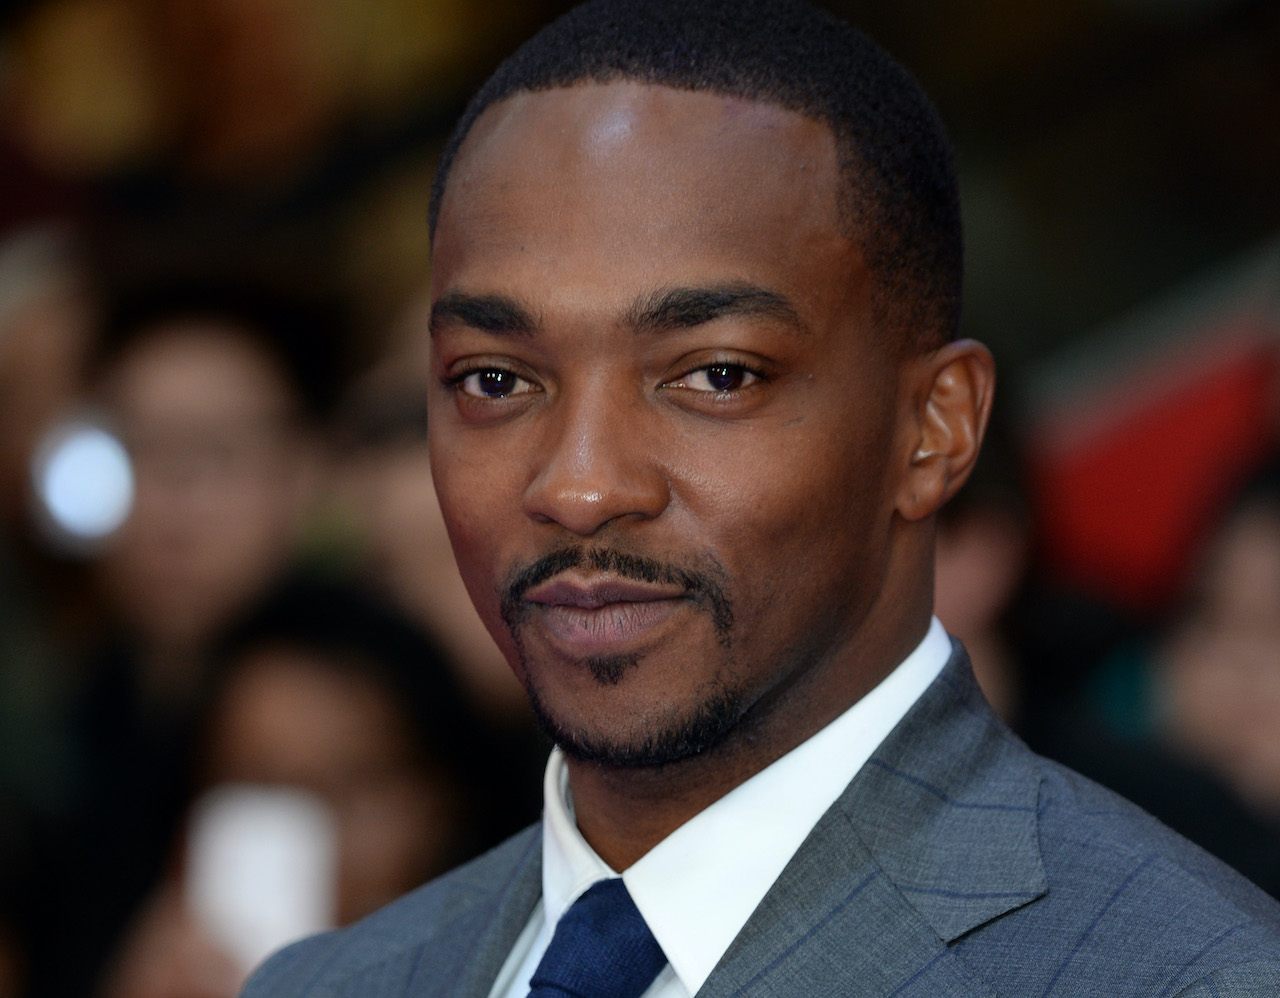 Anthony Mackie attends the European premiere of 'Captain America: Civil War' at Vue Westfield